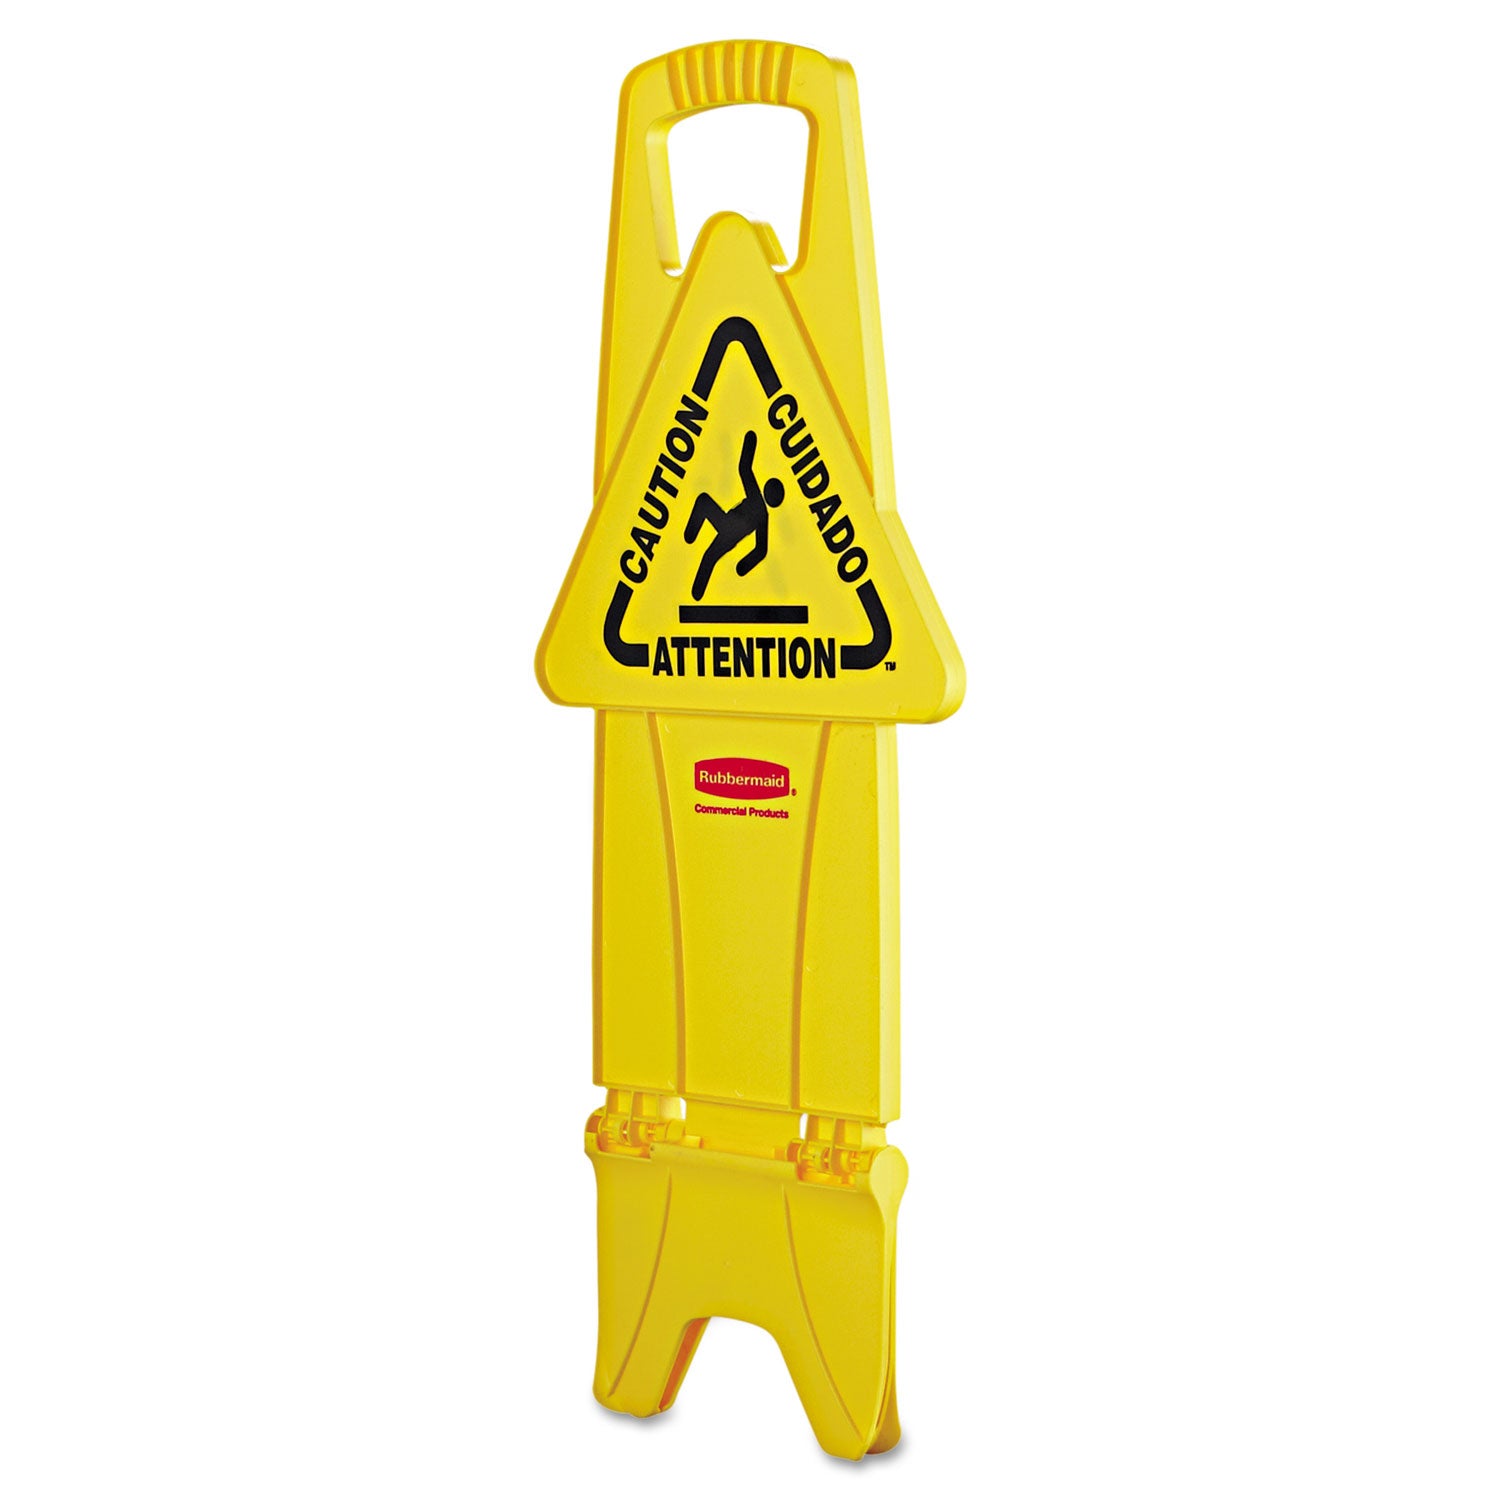 Stable Multi-Lingual Safety Sign, 13 x 13.25 x 26, Yellow - 